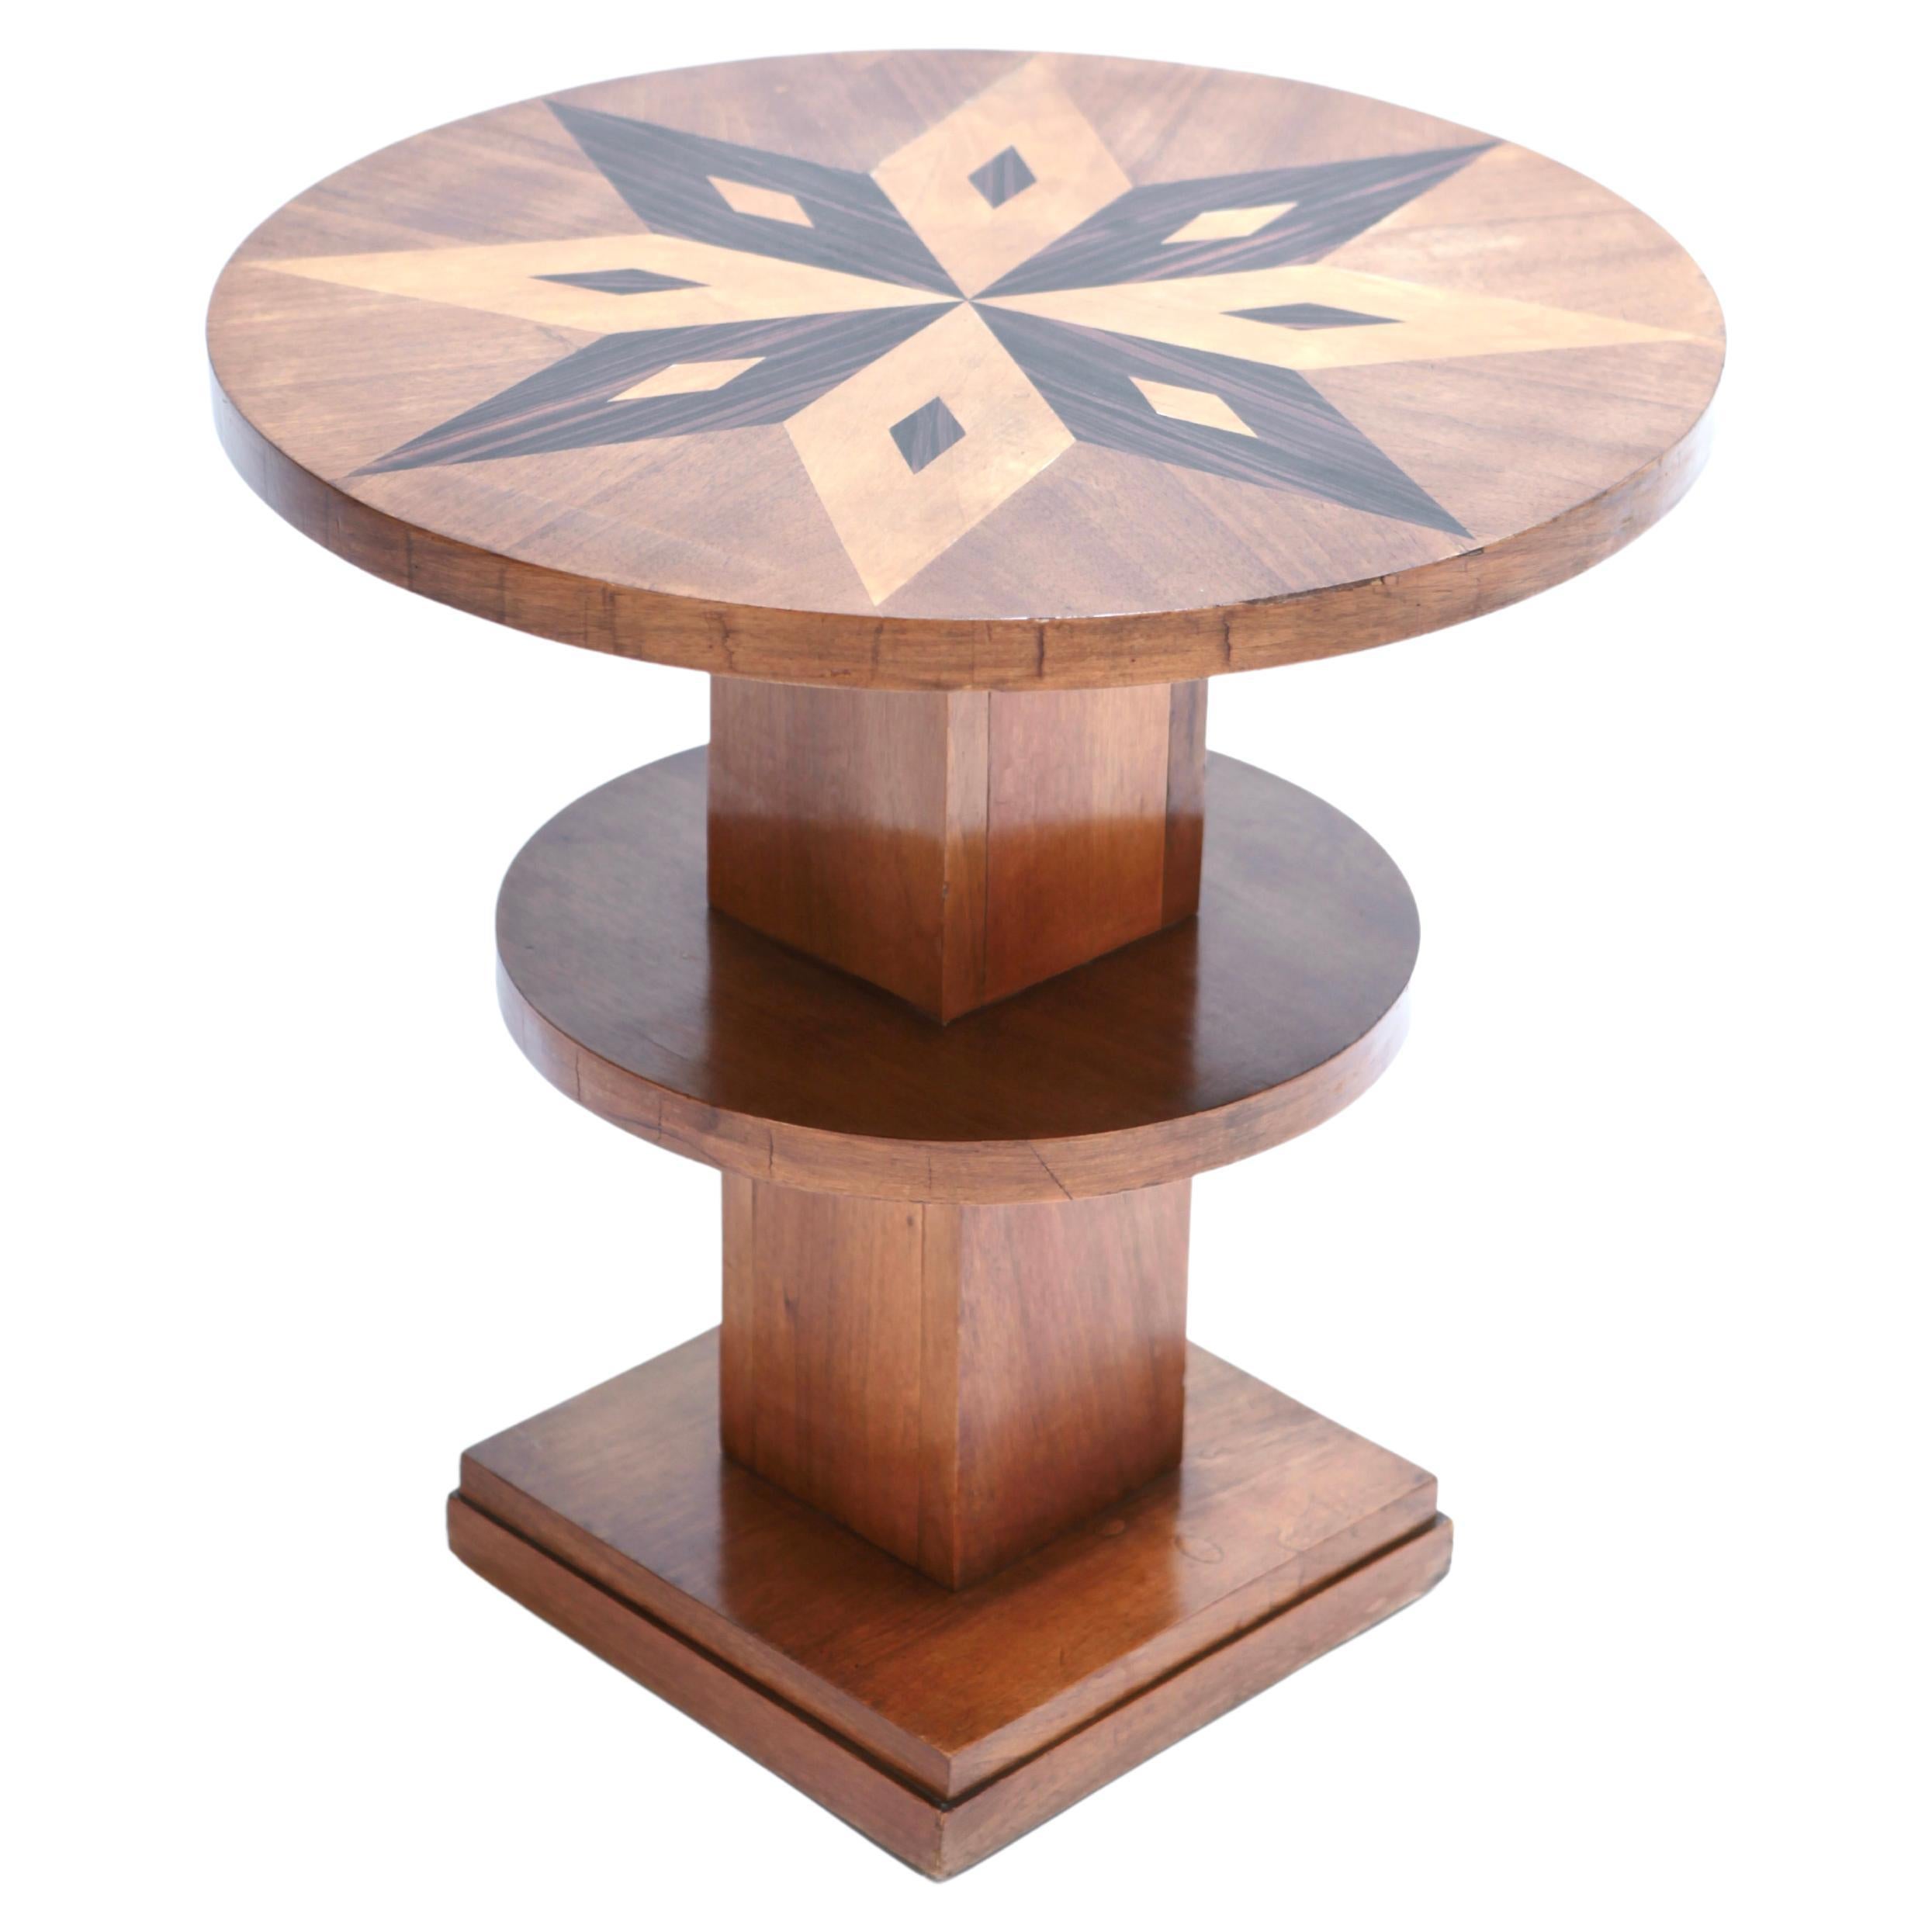 A French Art Deco Side Table, Wood Inlayed & Veneer, France 1930s For Sale